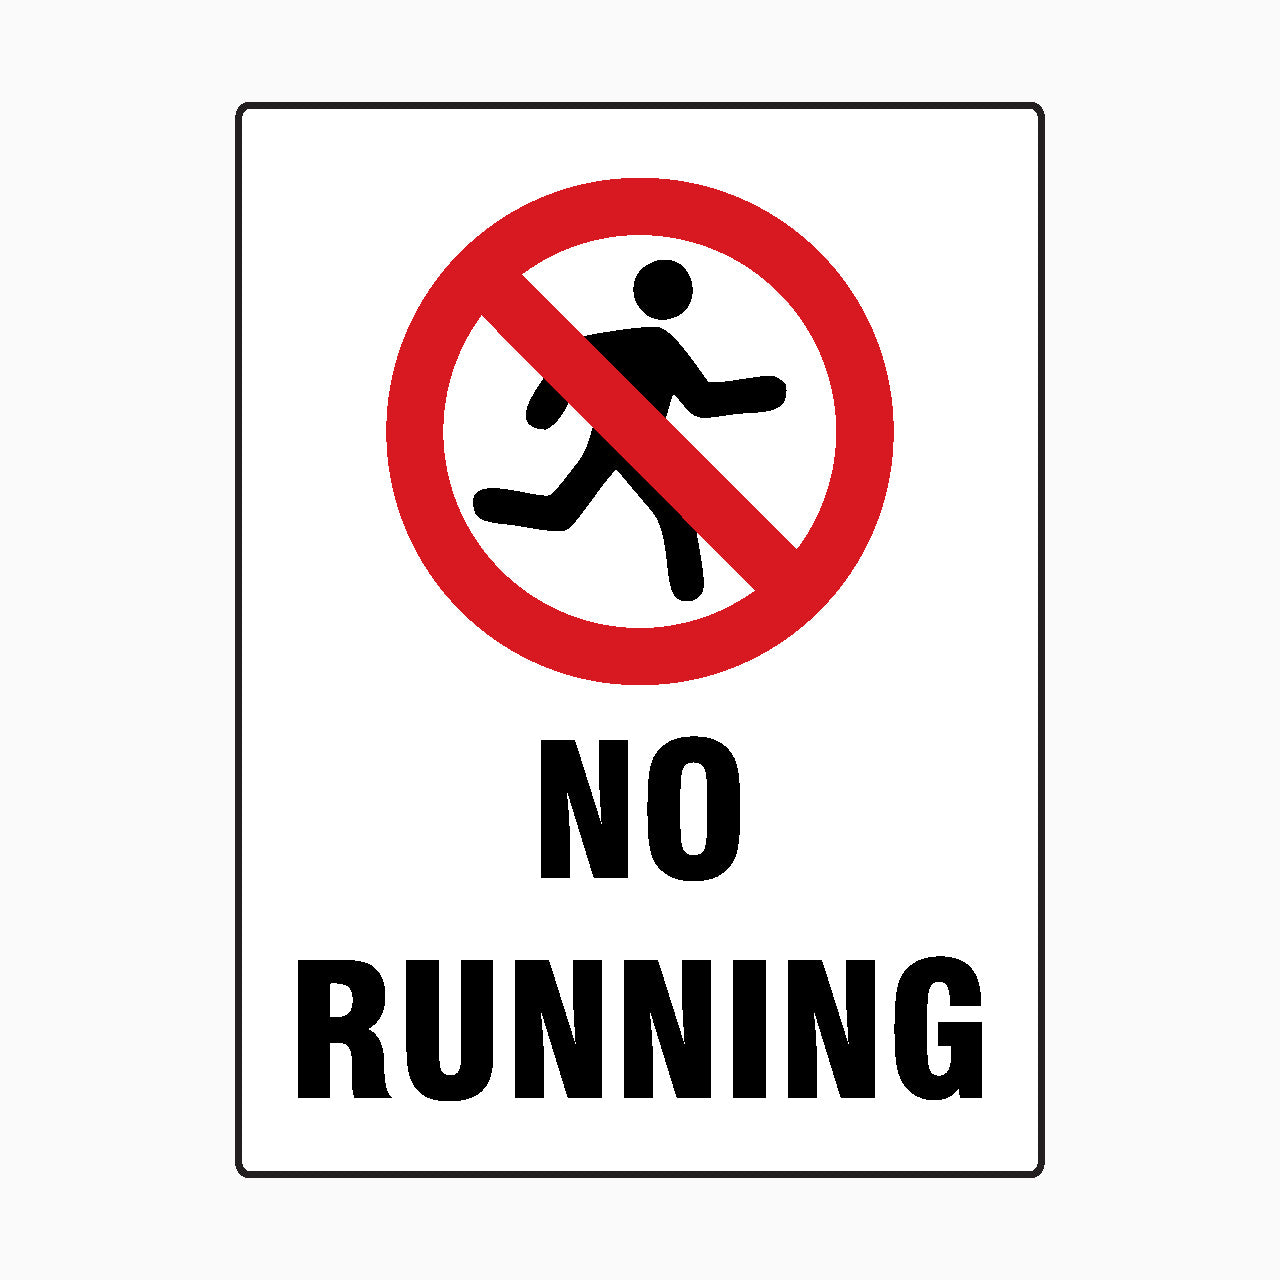 NO RUNNING SIGN - PROHIBITION SIGN